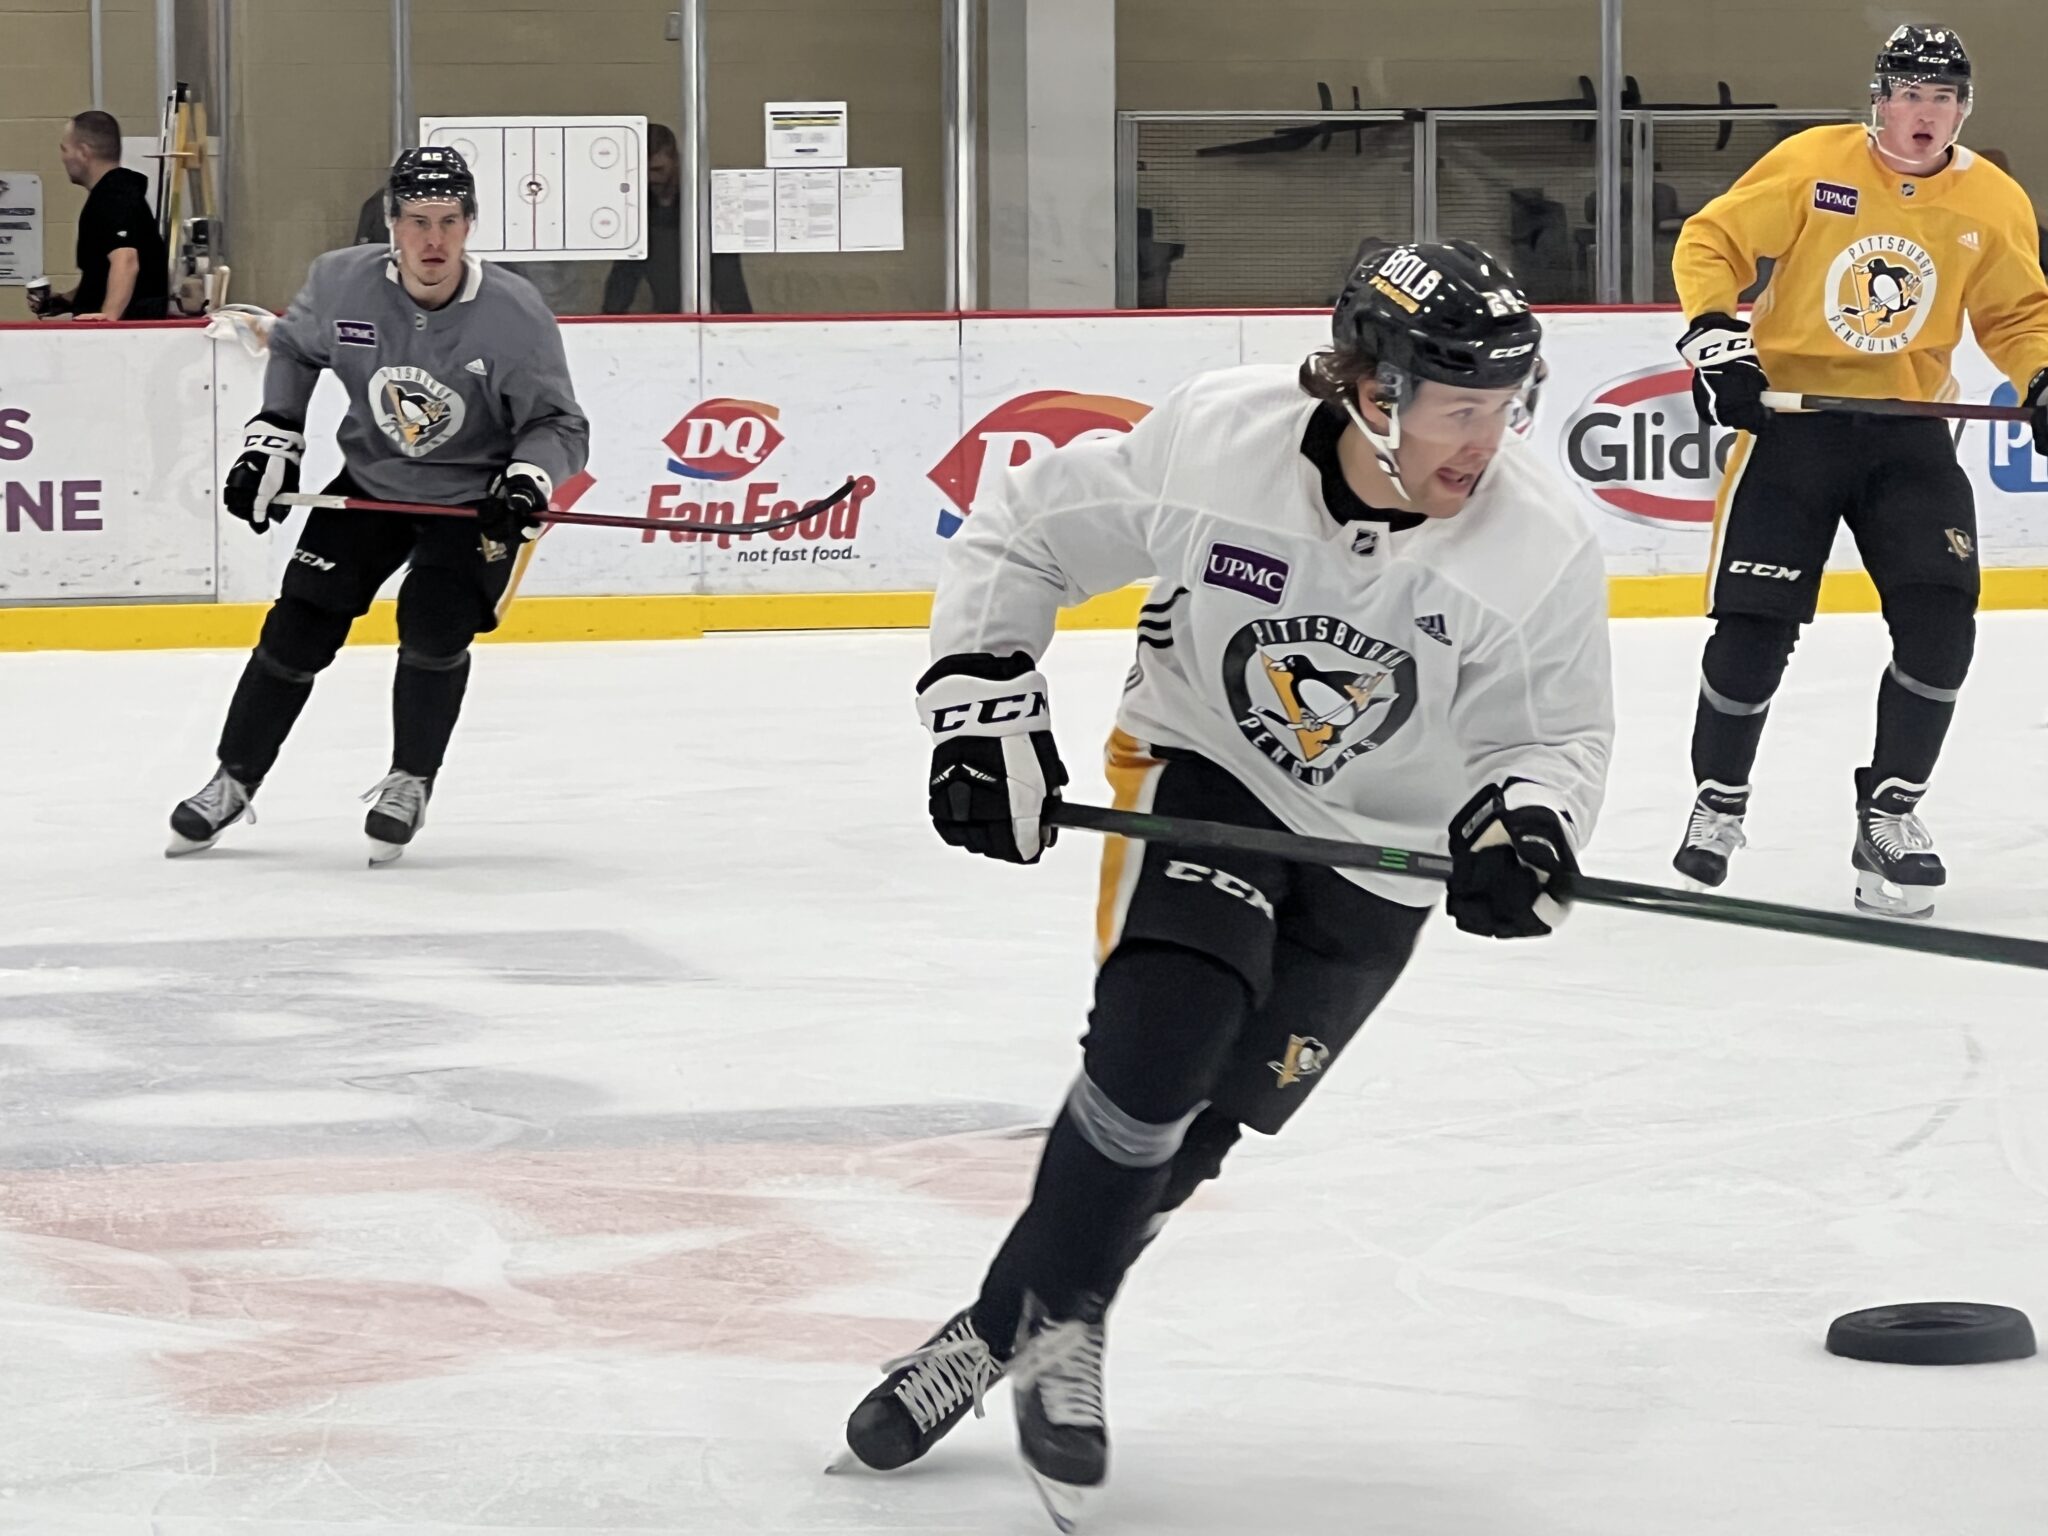 Penguins Notebook: 'Few Things to Clean Up'; Bedard Bedazzles